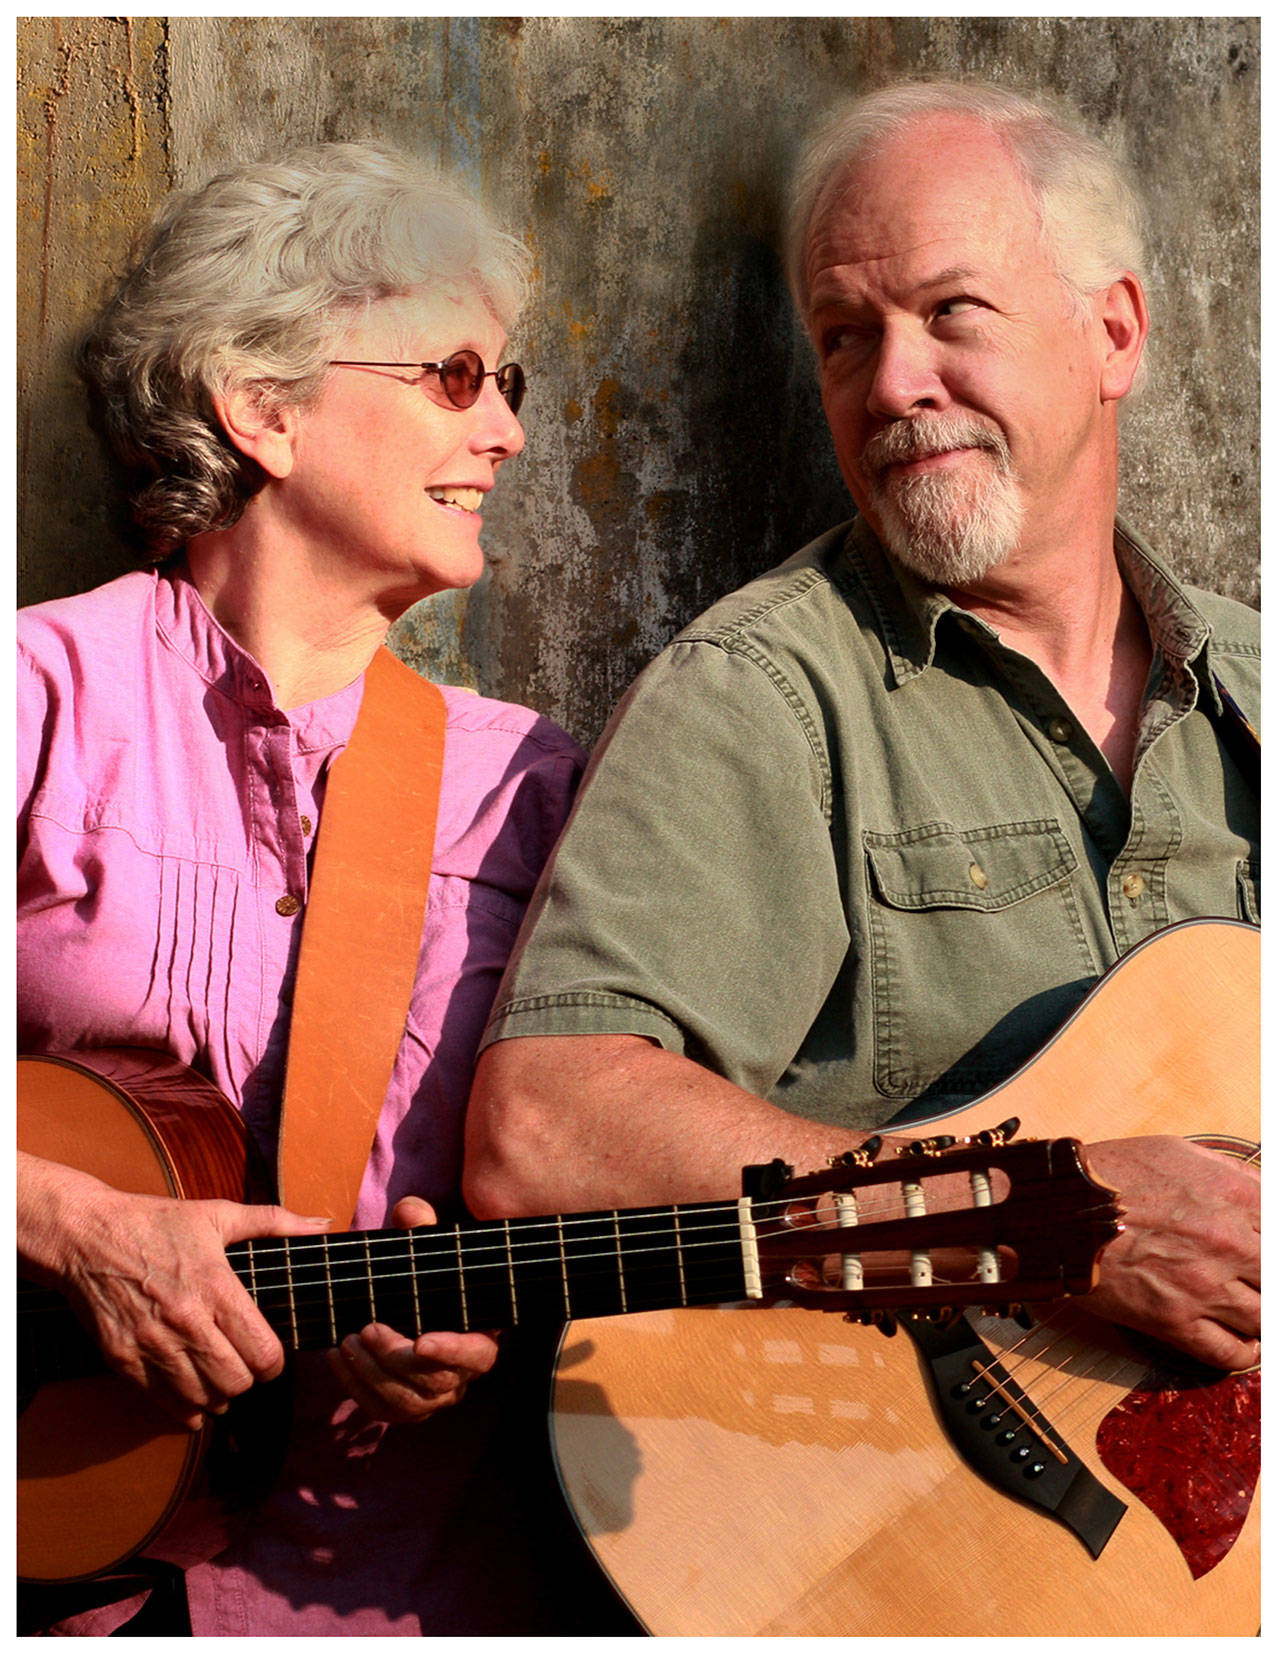 Hank and Claire visit Seabold Second Saturday for a night of music and song on Saturday, Nov. 11. (Photo courtesy of Seabold Second Saturday)